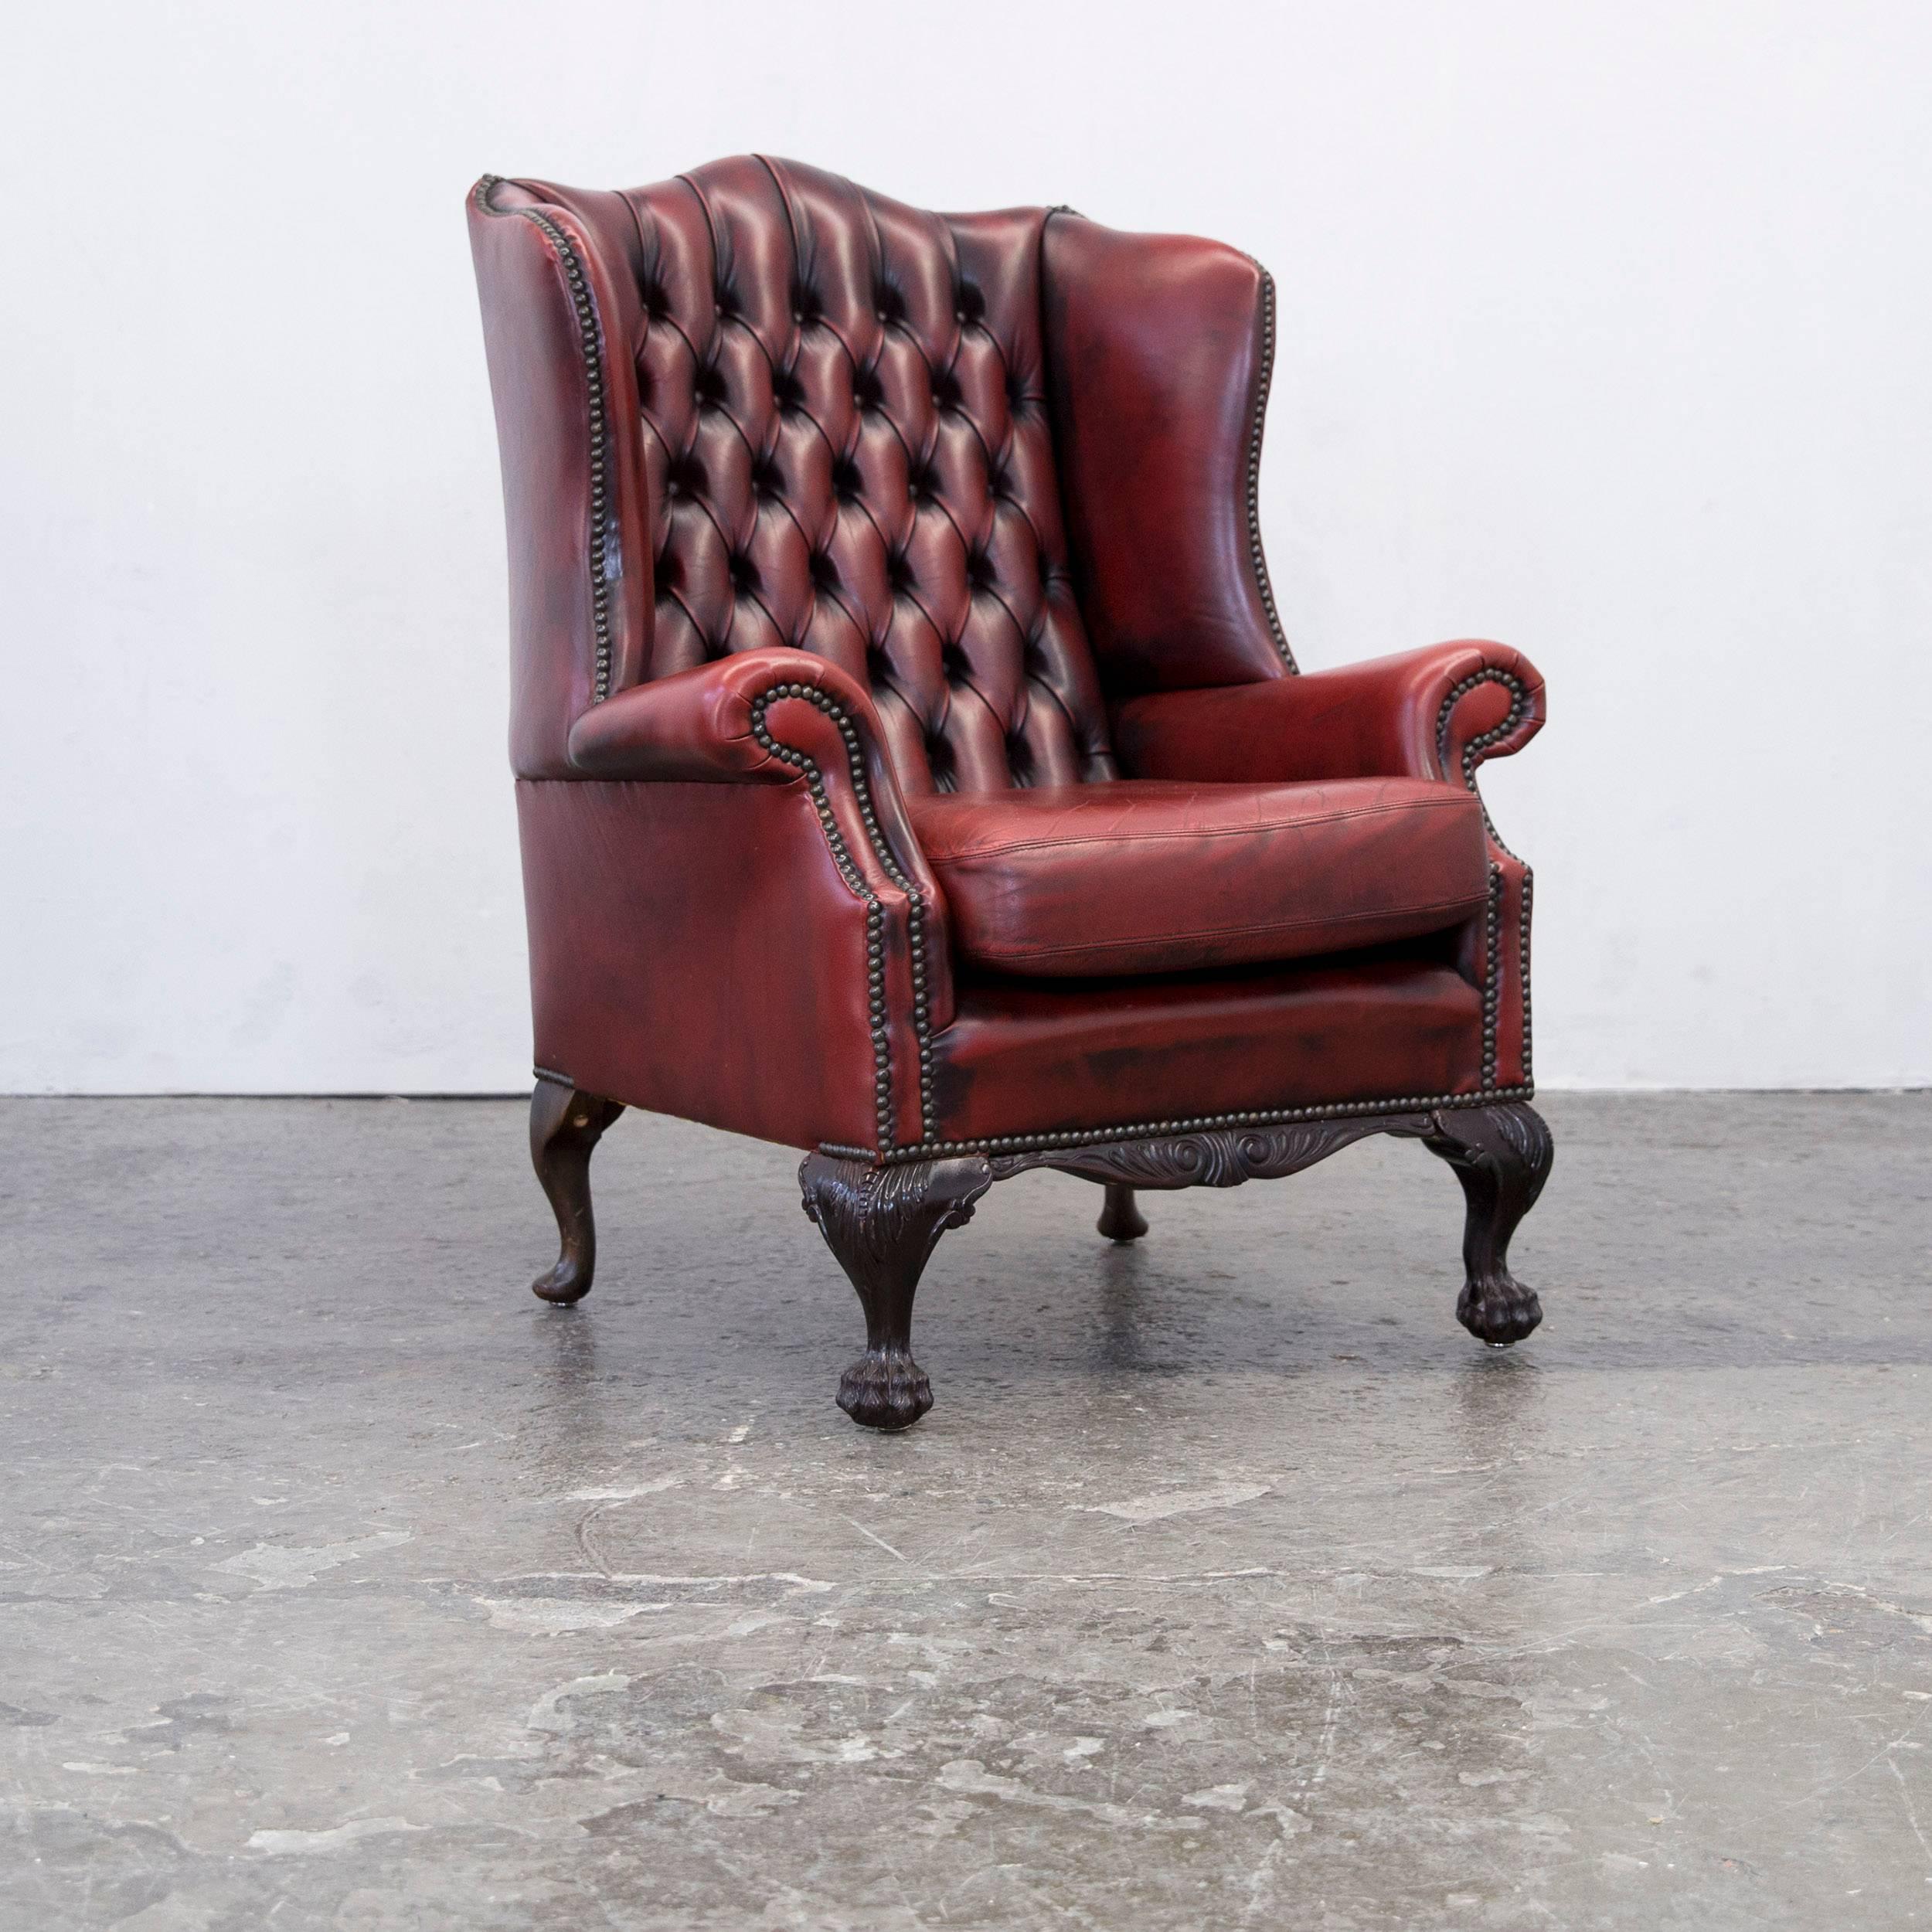 Chesterfield Wingback Chair Set of Four in Stunning Oxblood Red Full Leather 2